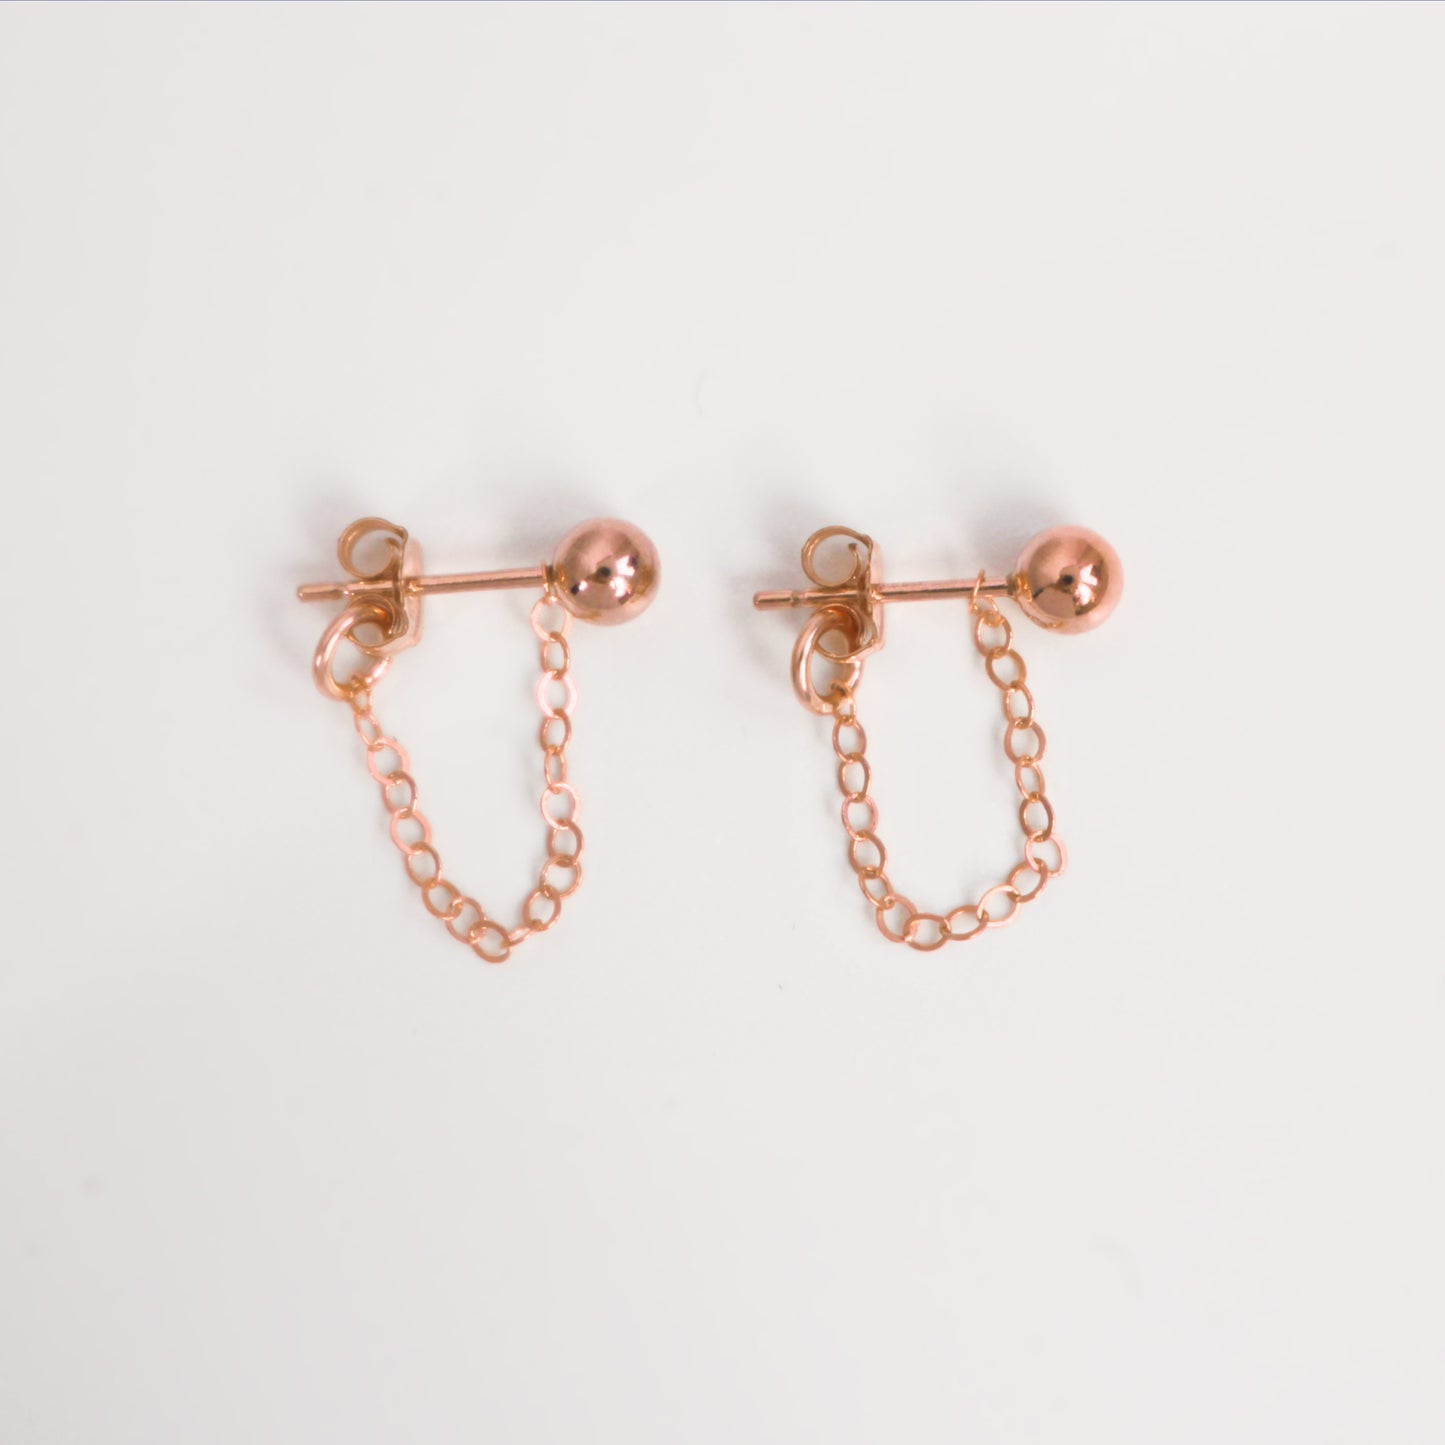 Front back earrings in 14k gold filled ∙ Removable chain ∙ Ball stud ears ∙ Jewelry for women ∙ Bridesmaid gift